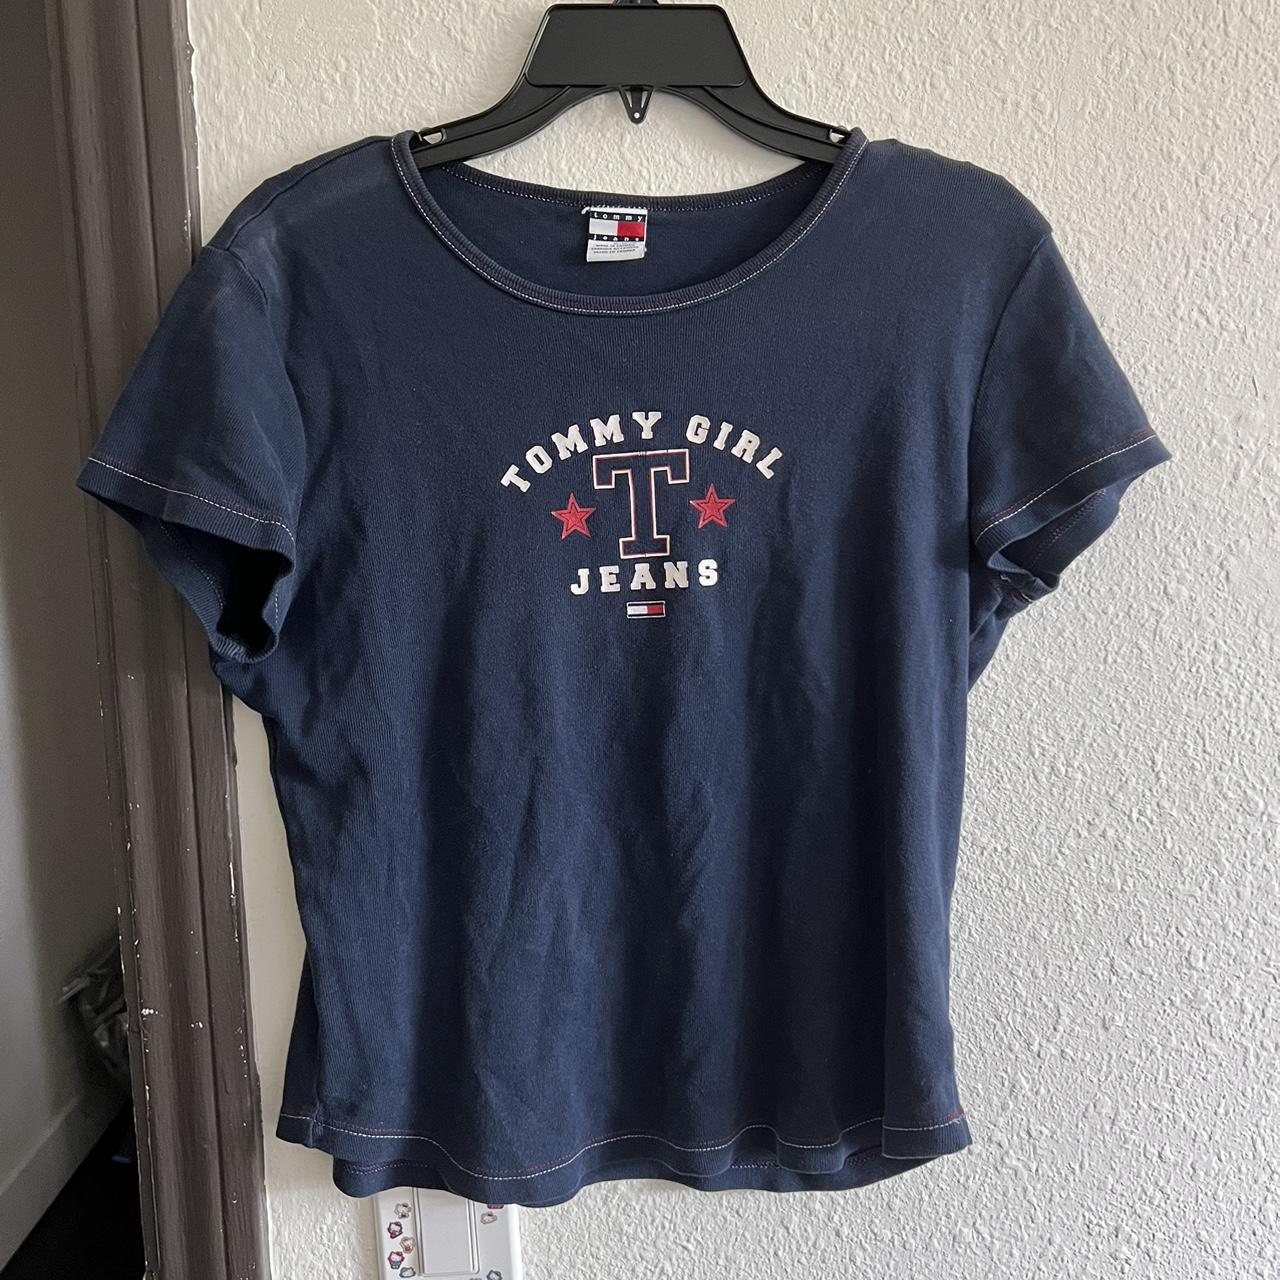 tommy girl jeans shirt 👍 it is cute. marked XL fits... - Depop